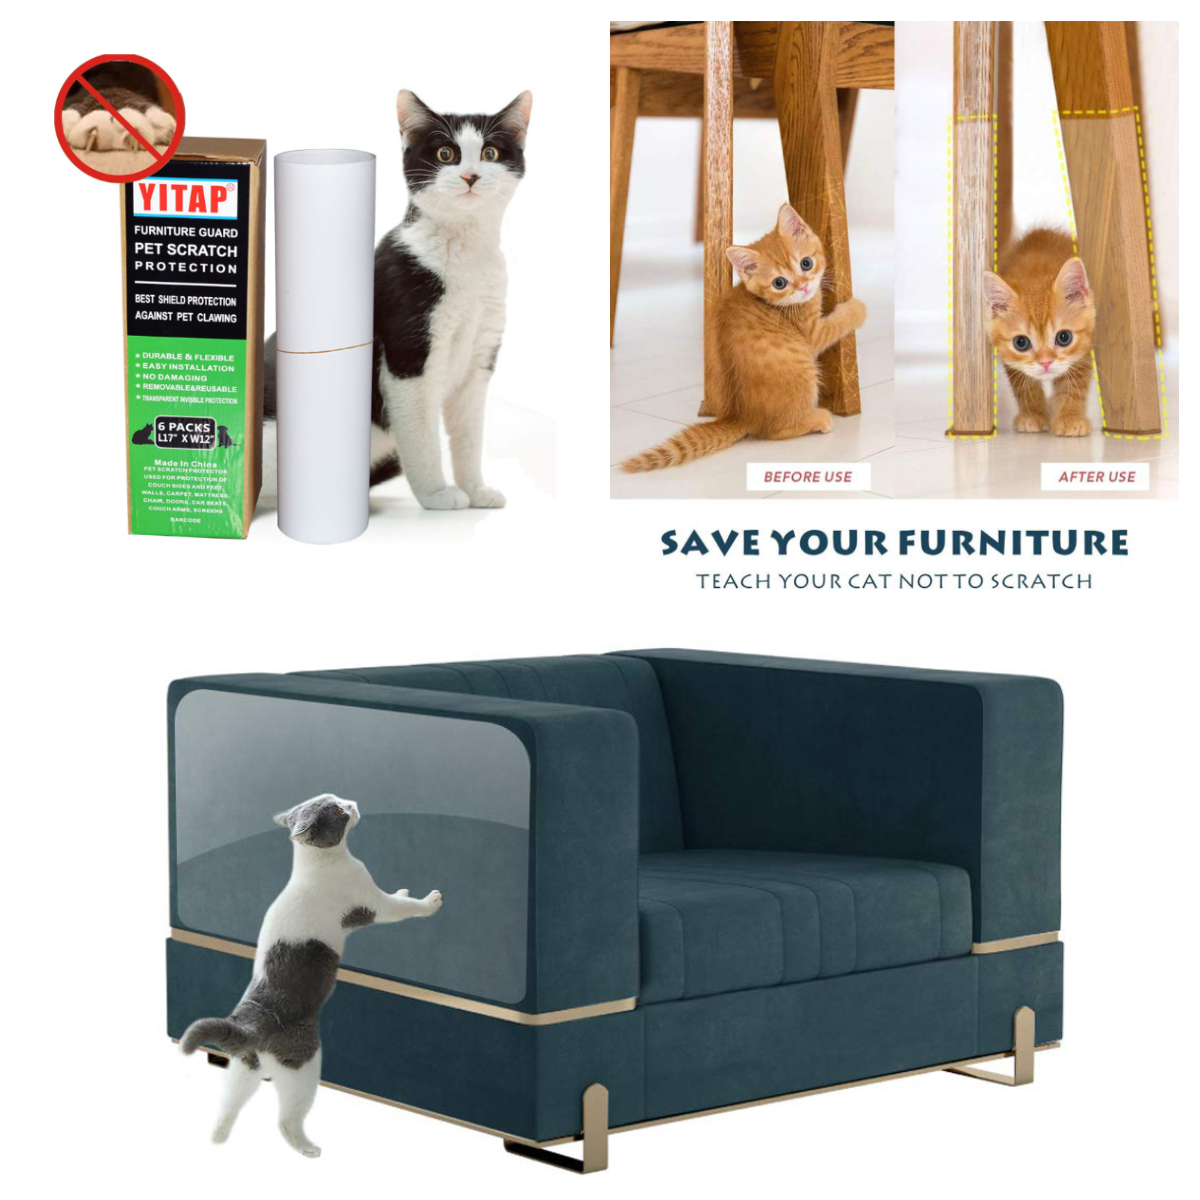 Furniture Guard Self Adhesive Cat Scratch Protector

Easy to apply and remove, also it is very Environment-friendly.

Email: Info@yitape.com
Whatsapp: (+86)-137-9028-3855
More info: yitape.com/furniture-guar…
#protectionfilm
#surfaceprotectionfilm
#automotiveprotectionfilm